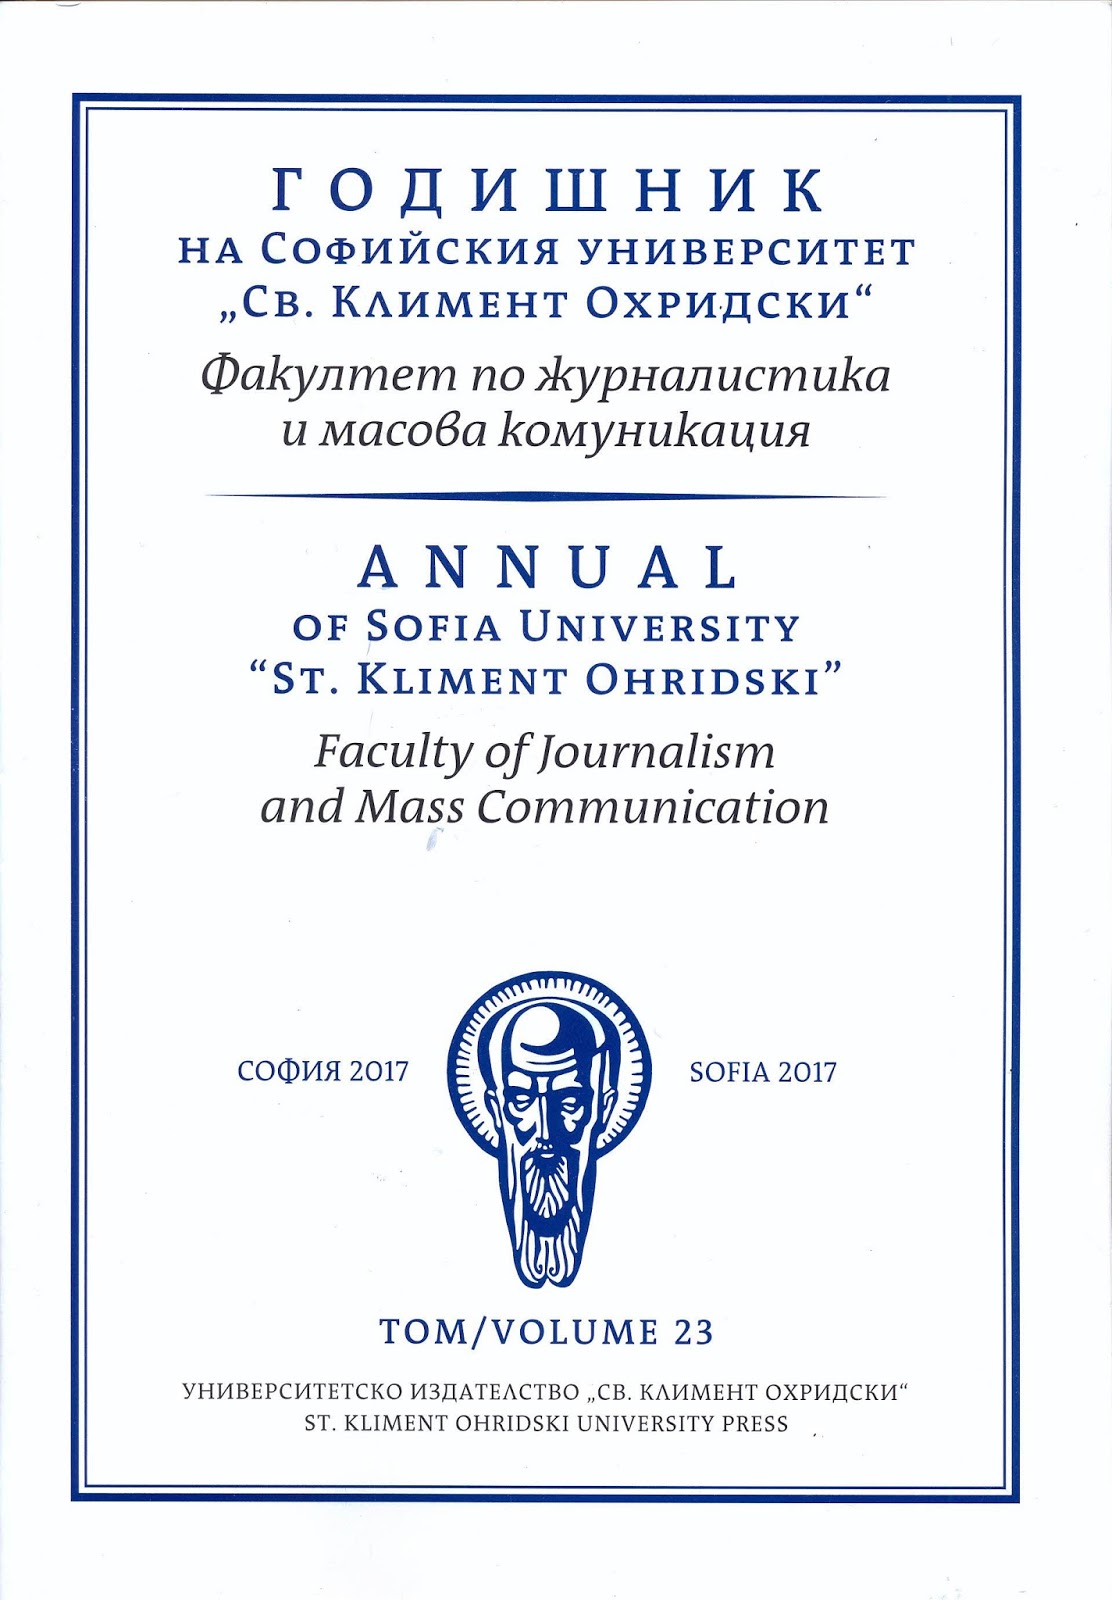 Annual of Sofia University „St. Kliment Ohridski”, Faculty of Journalism and Mass Communication